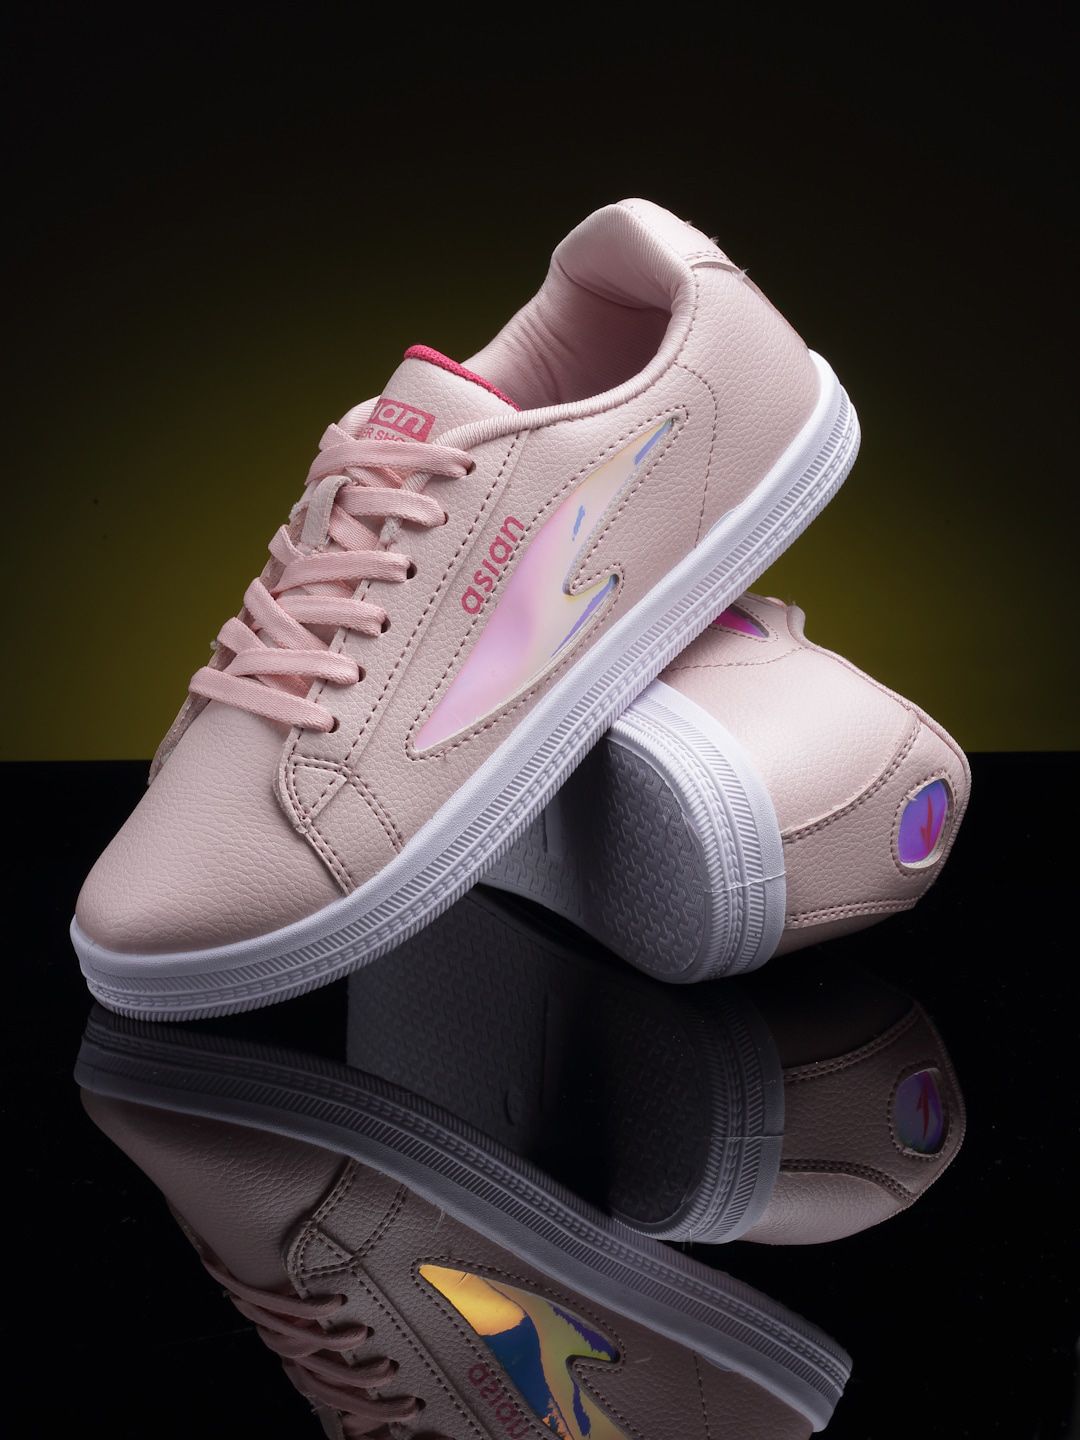 ASIAN Women Peach-Coloured Sneakers Price in India